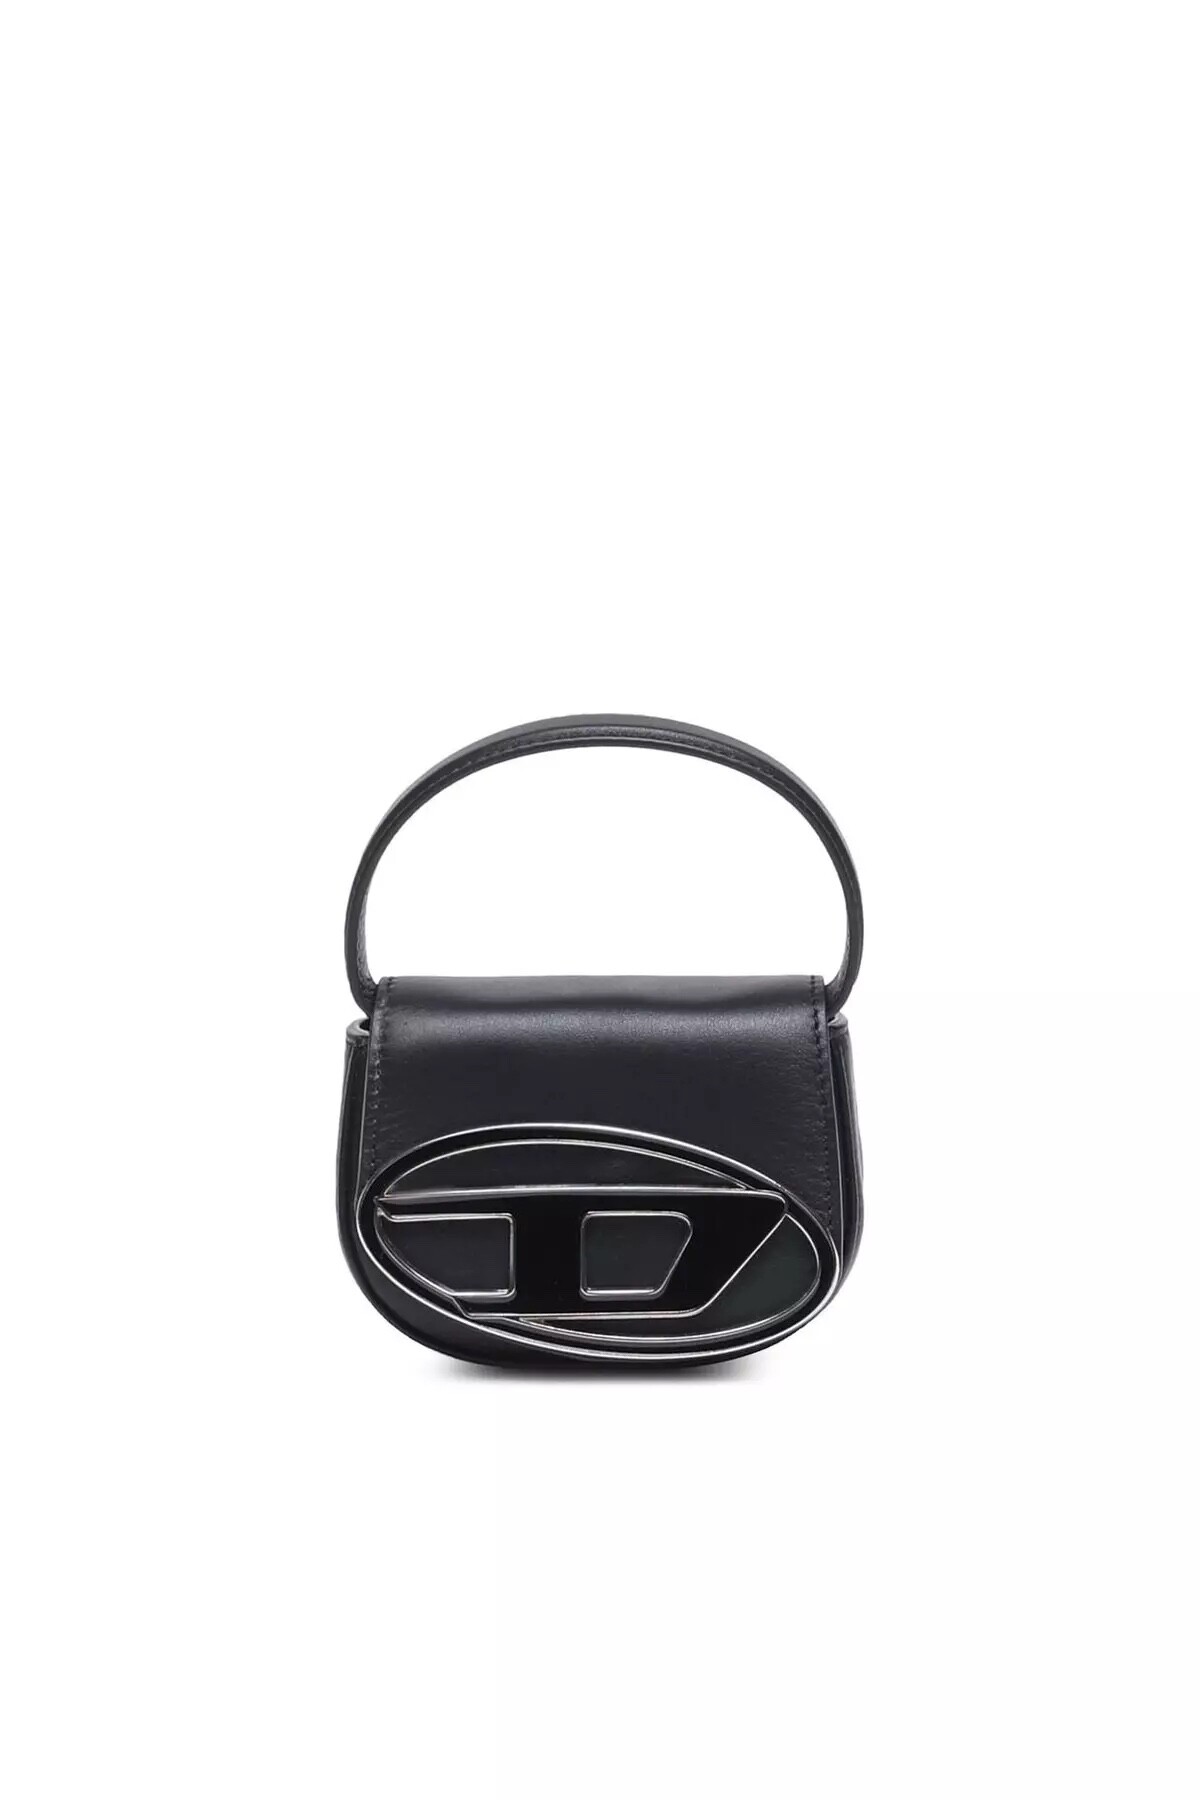 The Diesel 1DR Is The Hottest New Handbag On The Market. Kylie Jenner ...